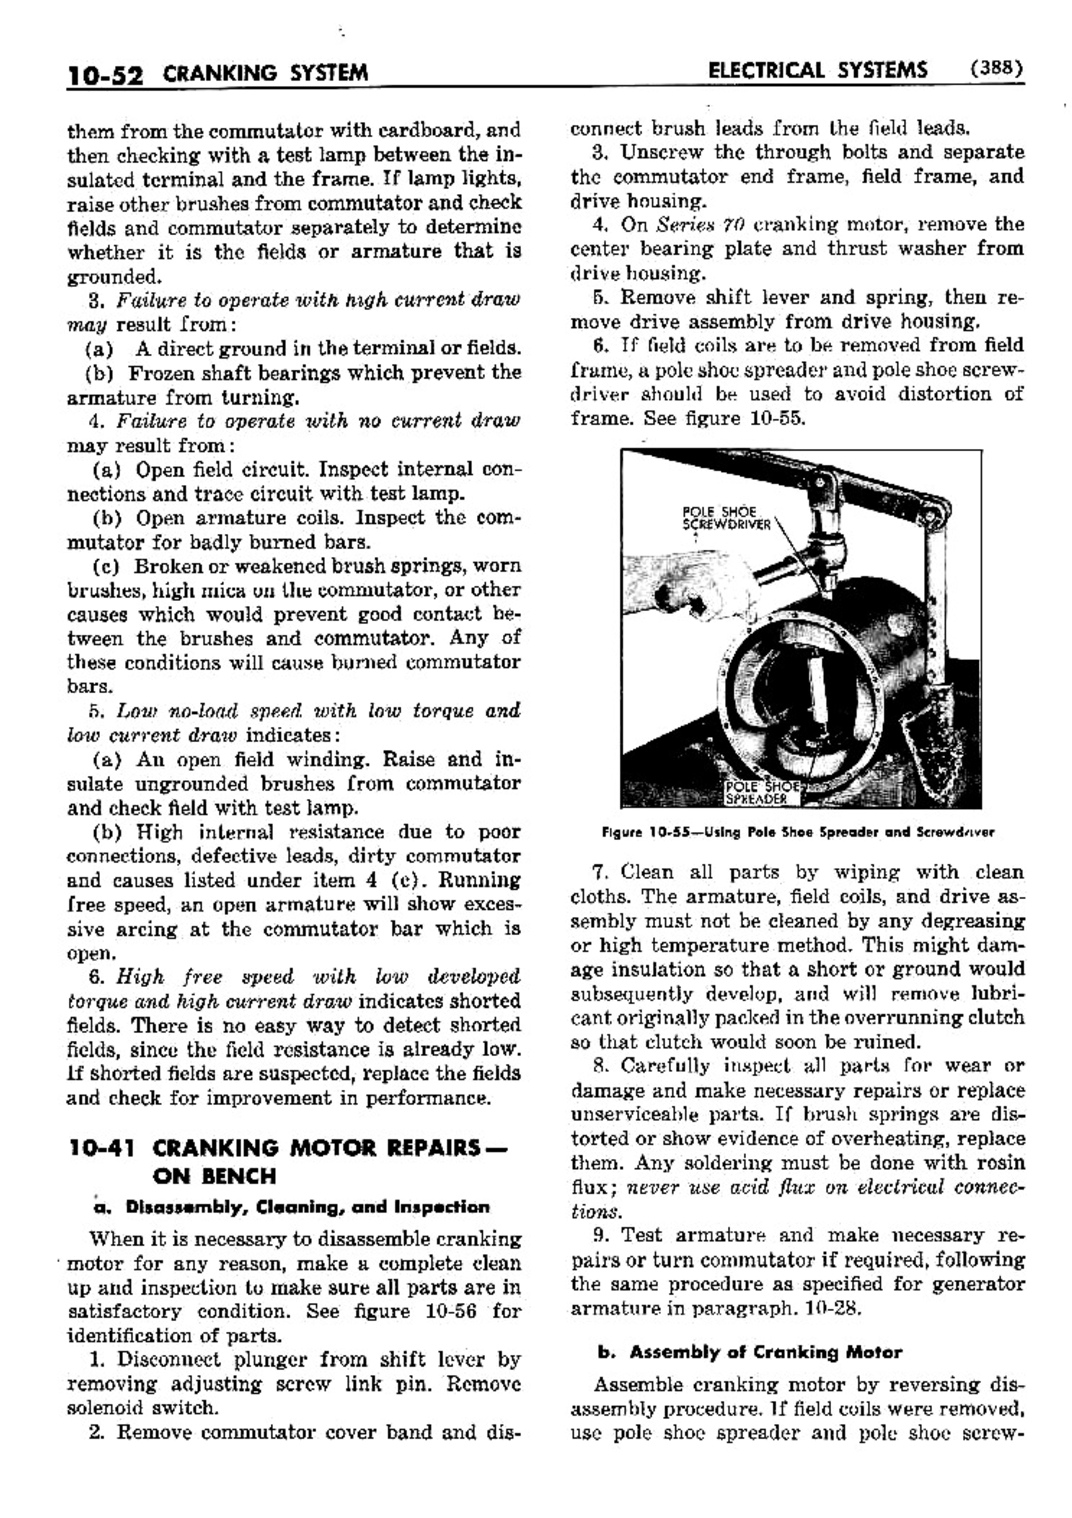 n_11 1952 Buick Shop Manual - Electrical Systems-052-052.jpg